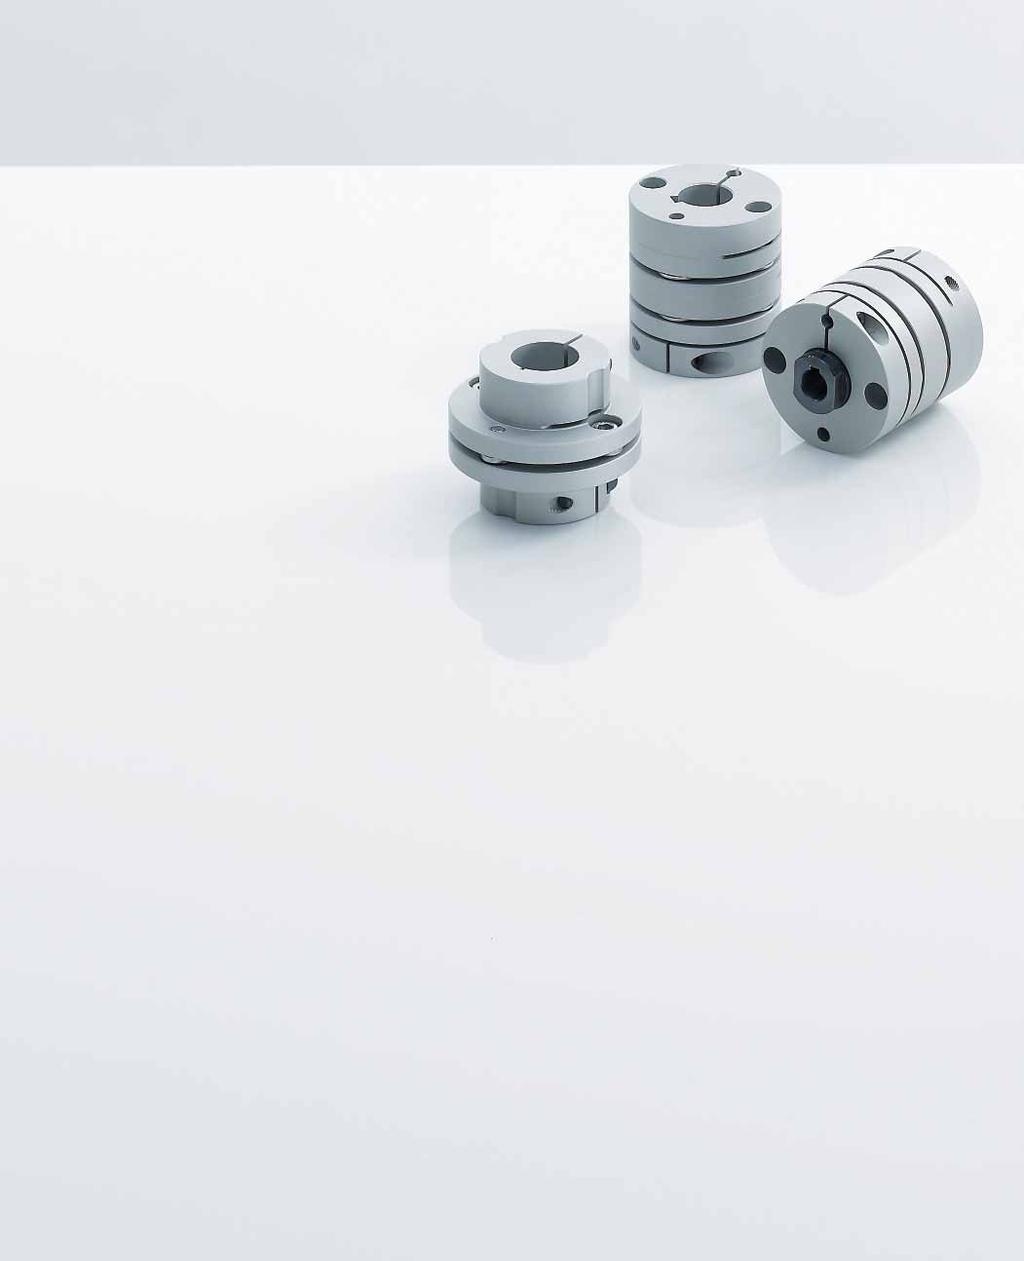 SFC MODEL SFC : A Wide Selection of Metal Plate Spring Couplings Made of High-power Aluminum Alloy Two types of couplings, either a rigid type with one element or a fl exible type with two elements